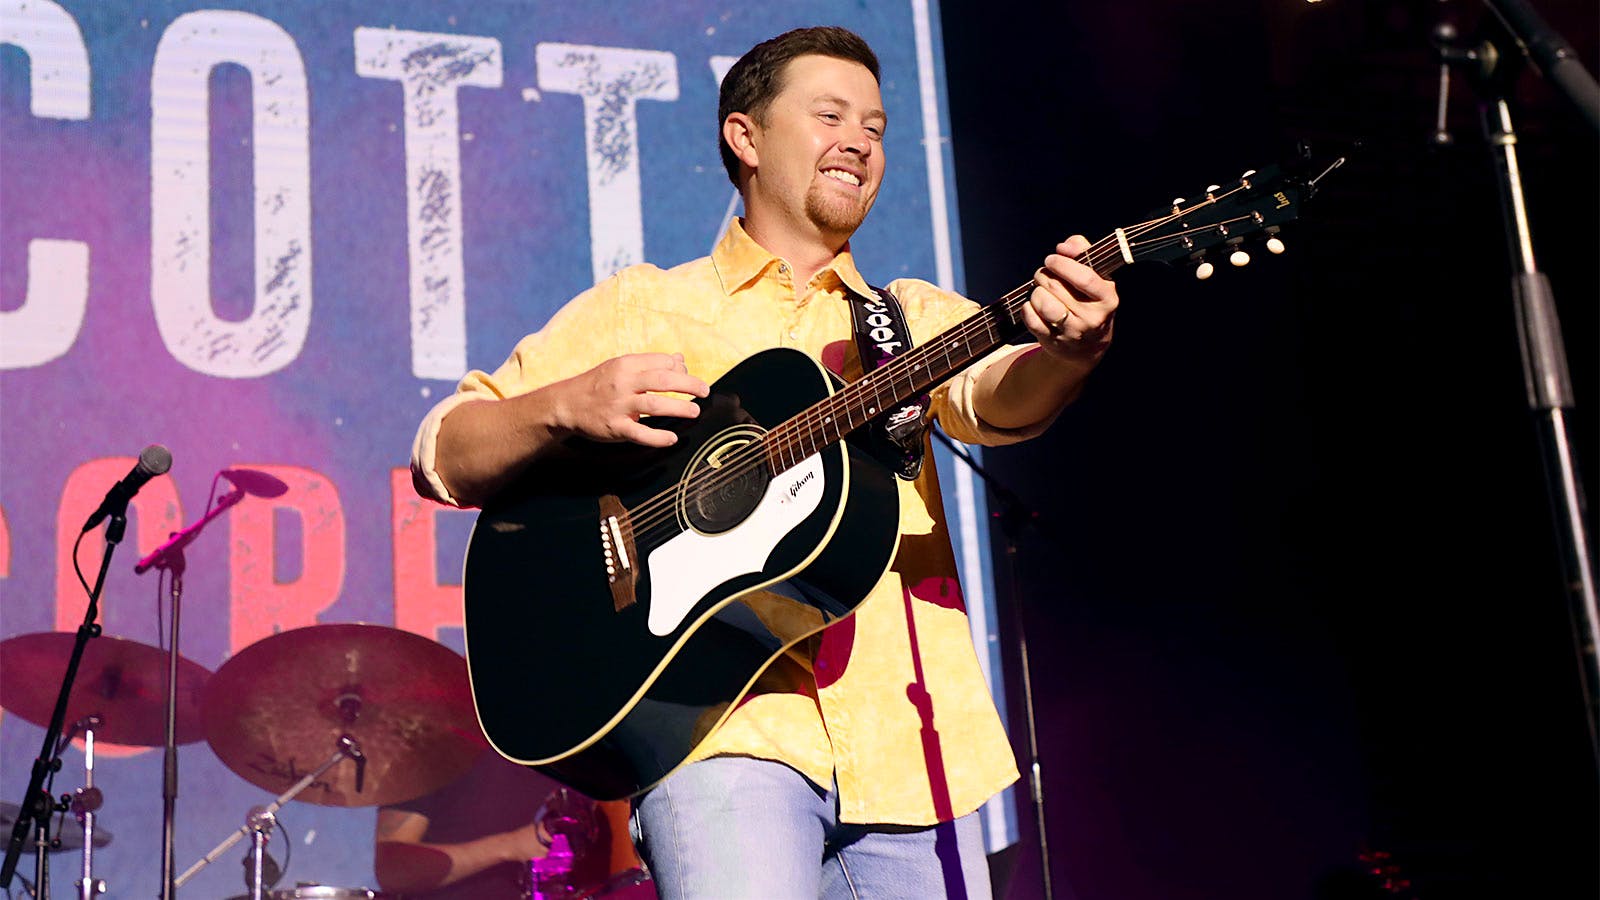 Scotty McCreery playing his guitar on stage during a concert in Nashville.